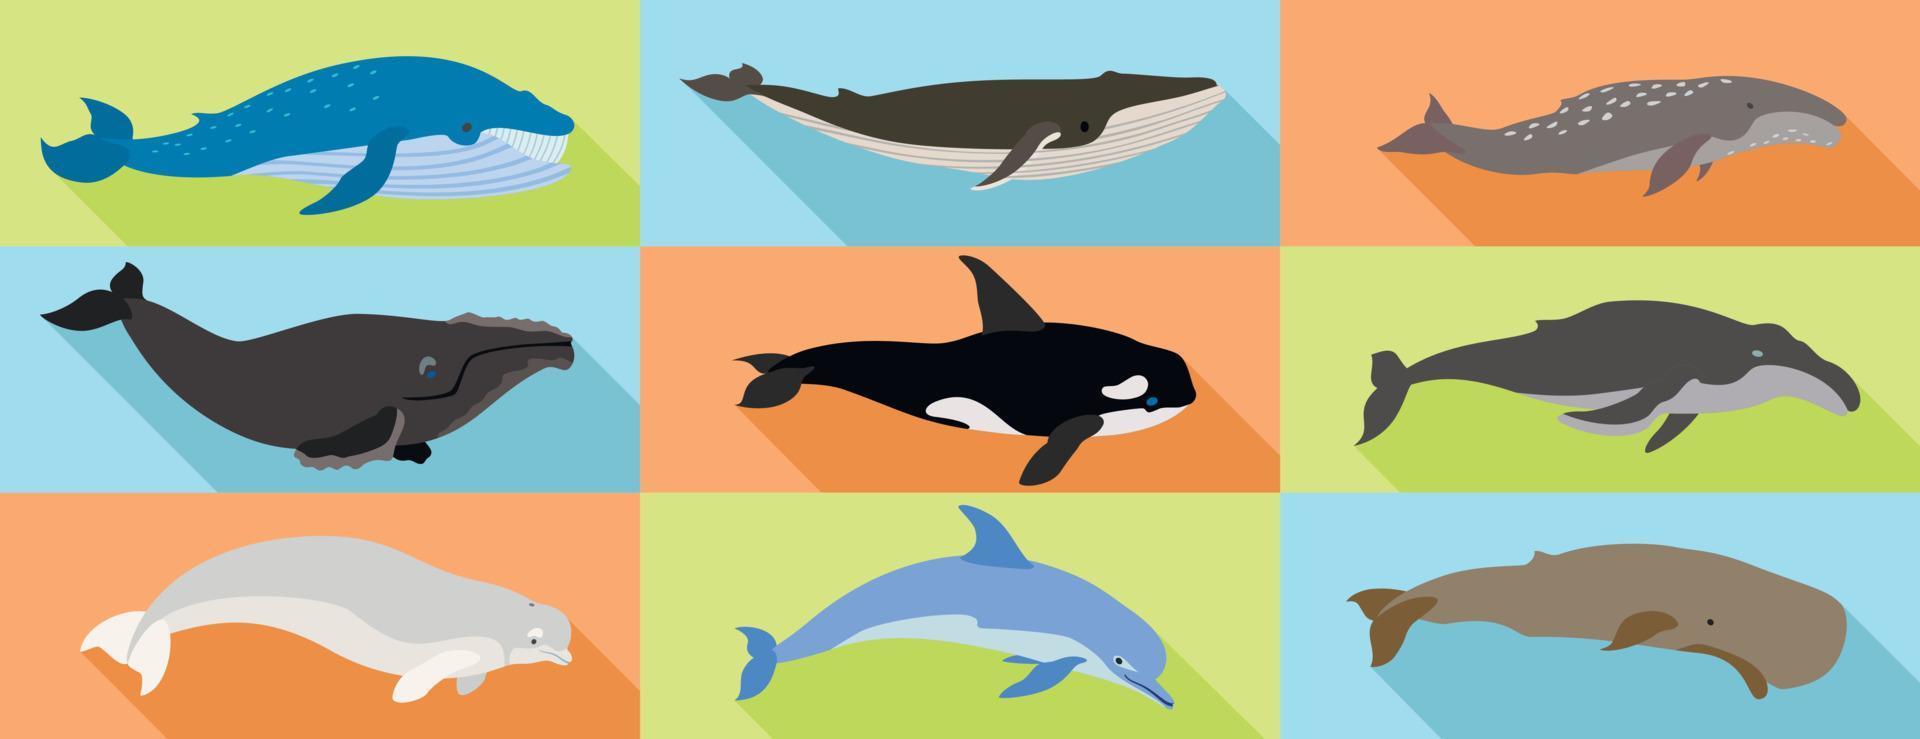 Whale icons set, flat style vector